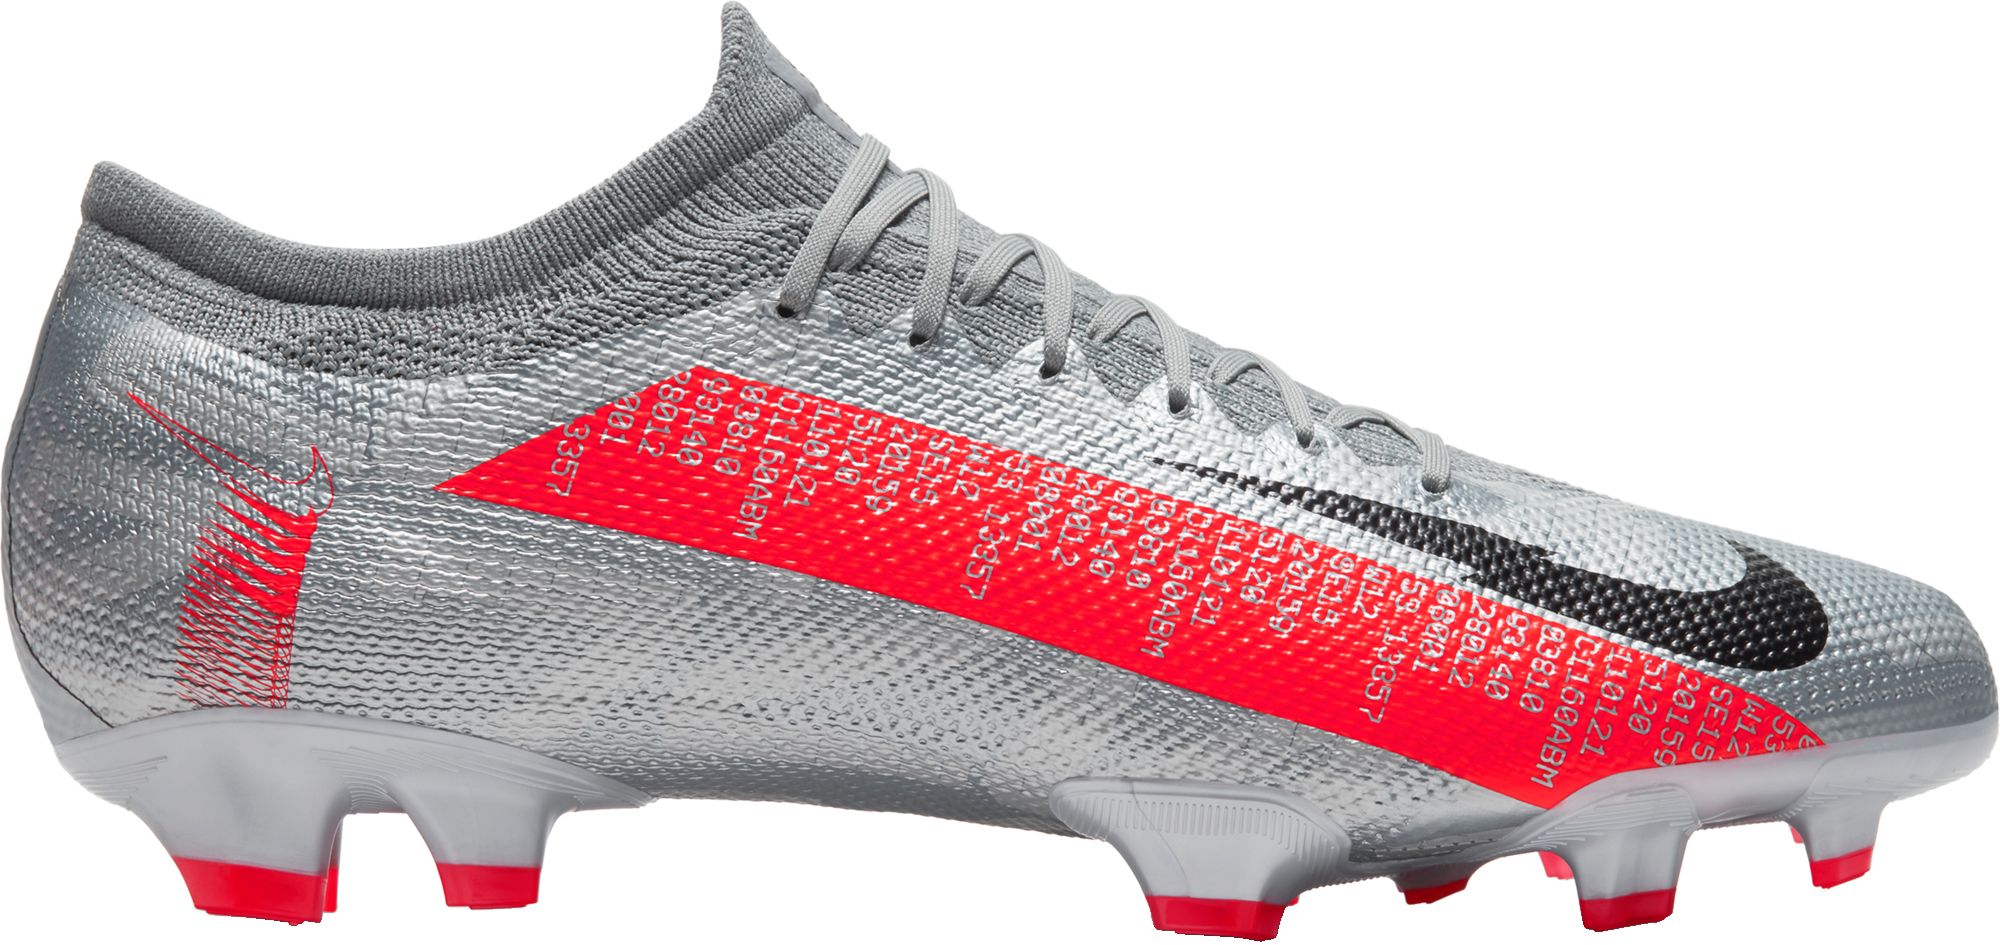 grey soccer cleats